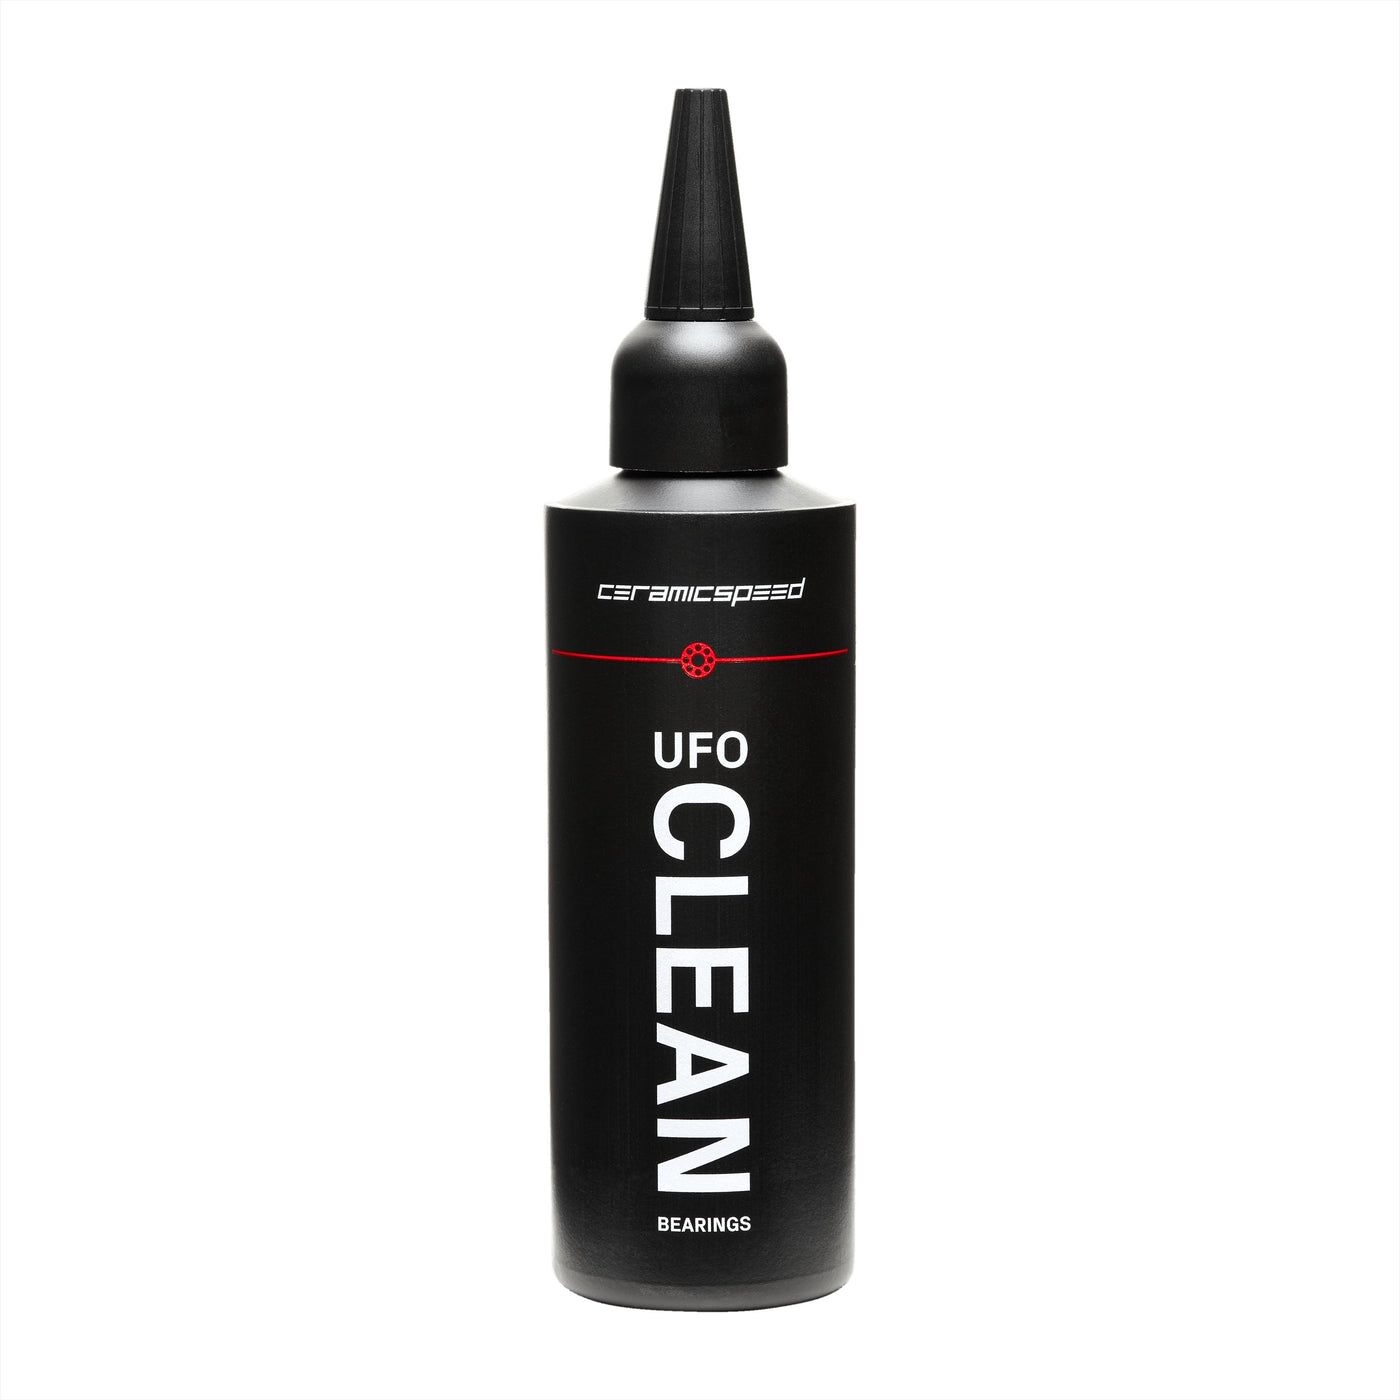 Ceramicspeed Pop Of UFO Clean Bearings Display With 9 X 100ml Bottles - Cyclop.in